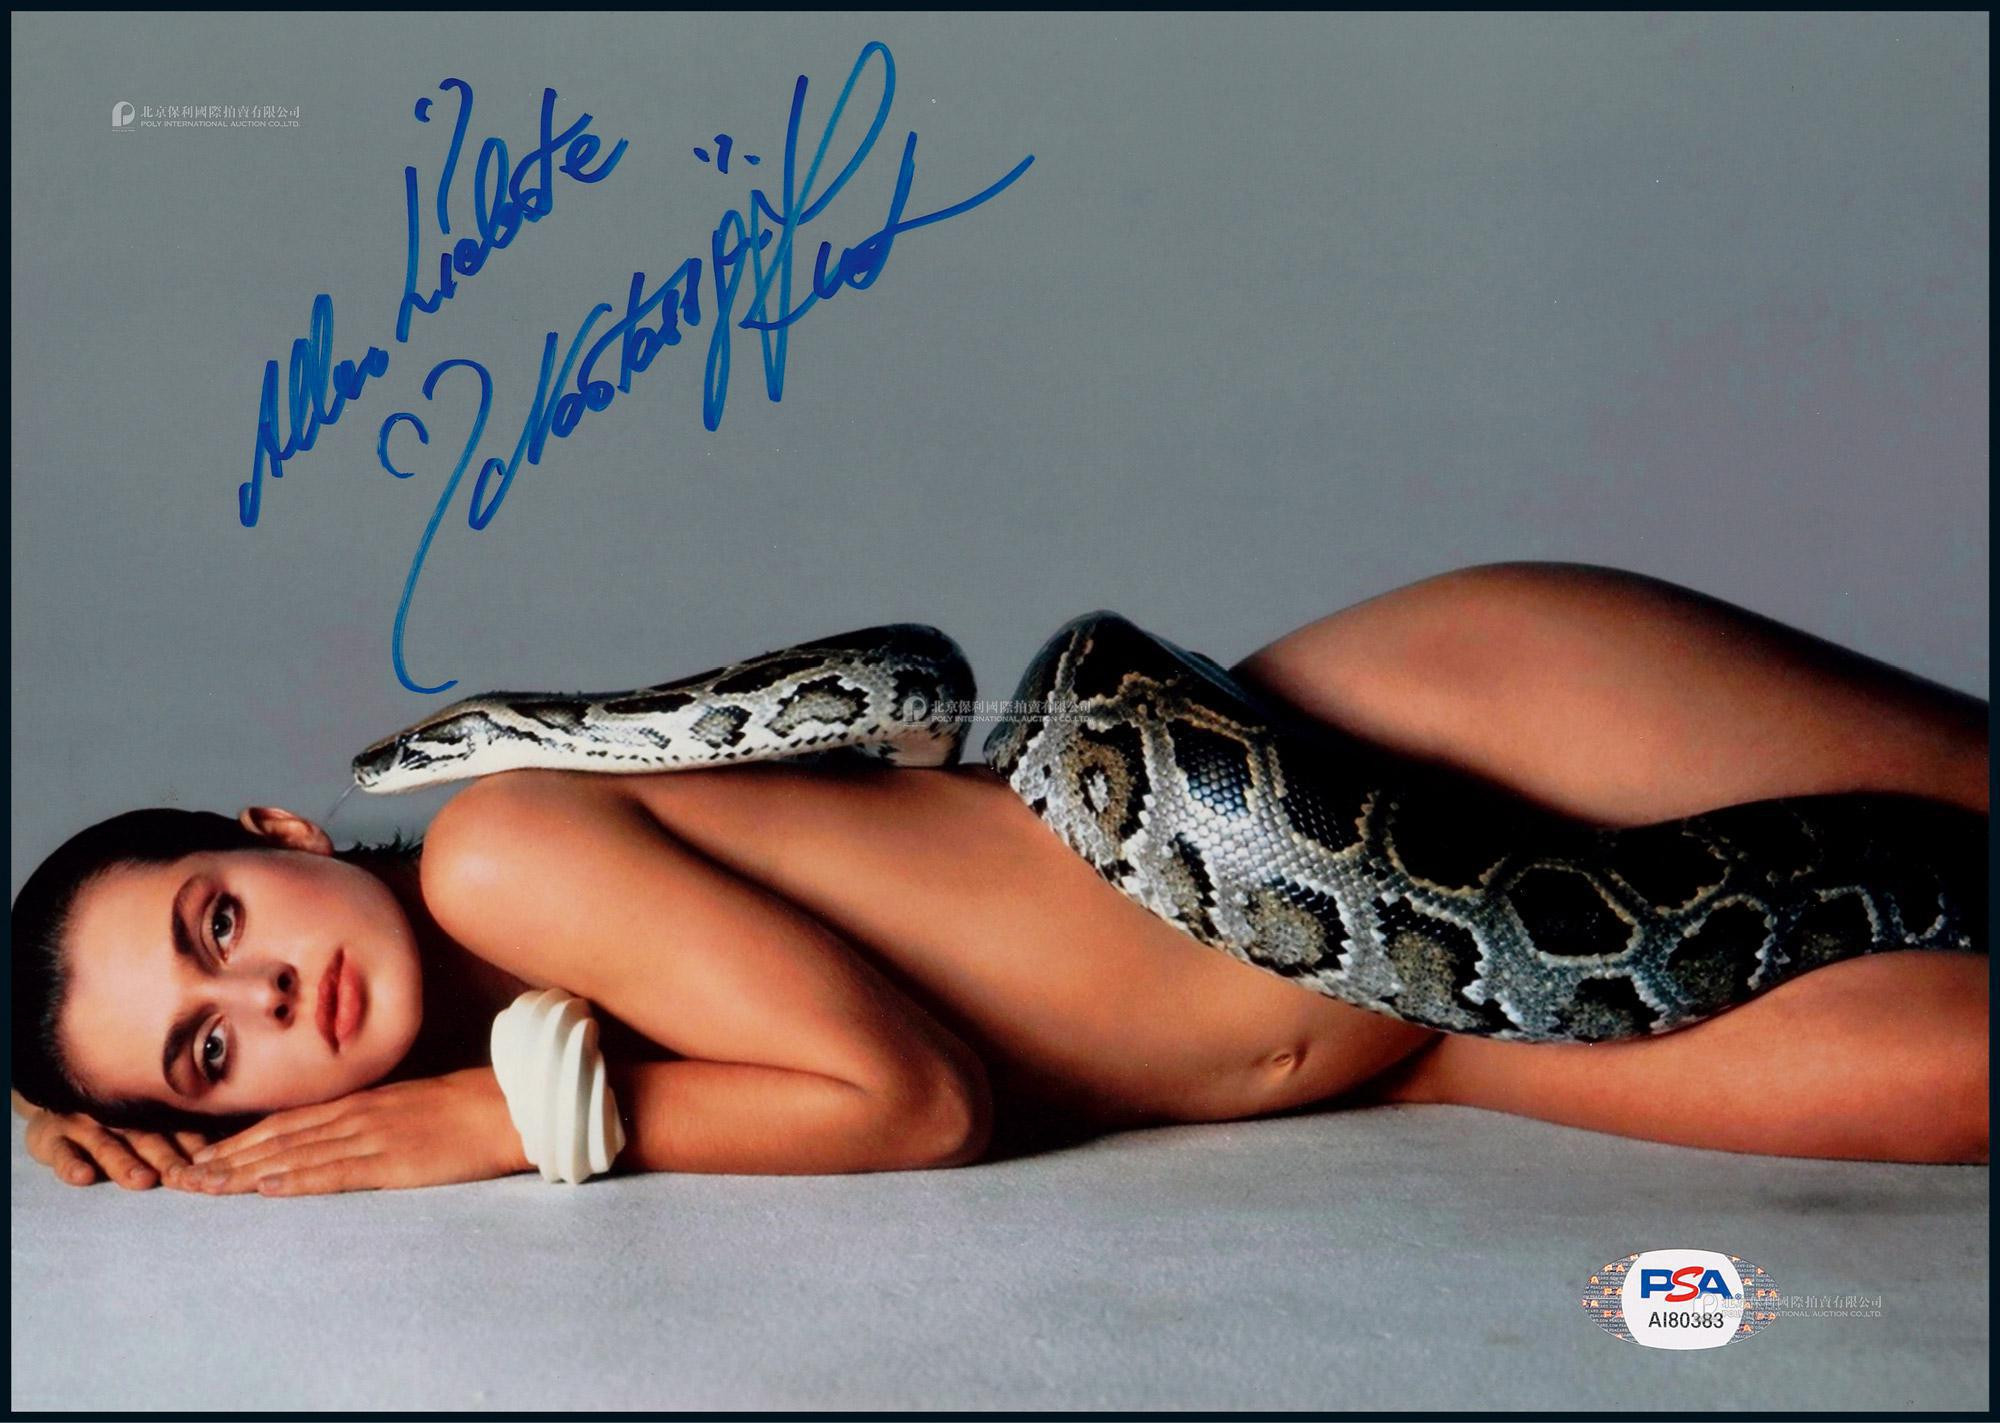 The autographed photo of Nastassja Kinski, “the most beautiful woman in European movie circle”, with certificate